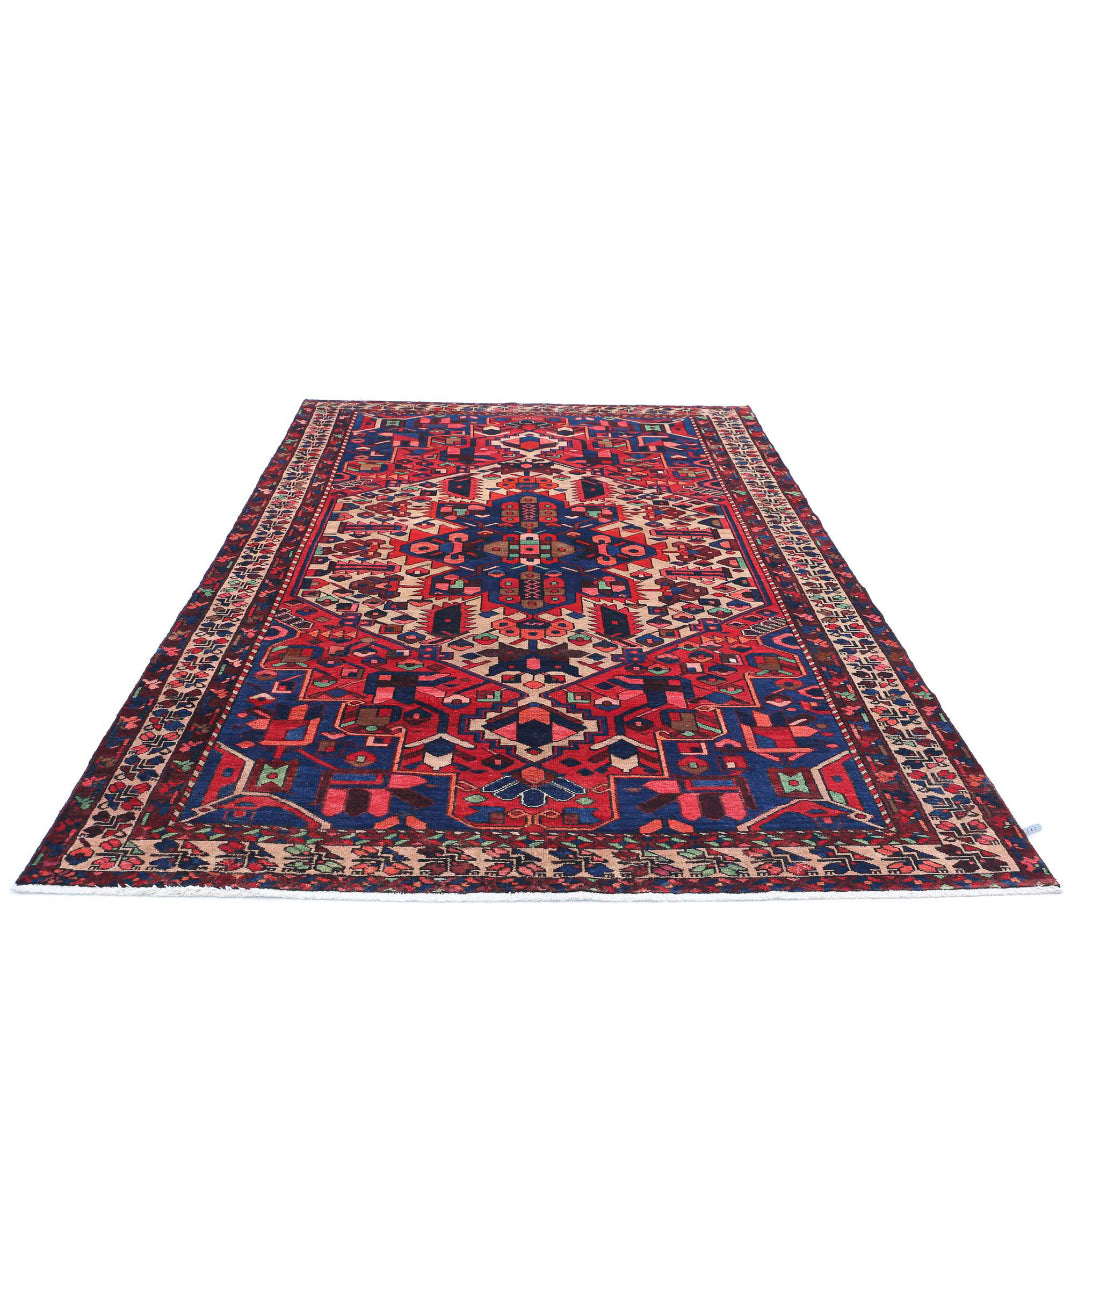 Hand Knotted Persian Bakhtiari Wool Rug - 6'7'' x 10'2'' 6'7'' x 10'2'' (198 X 305) / Red / Ivory